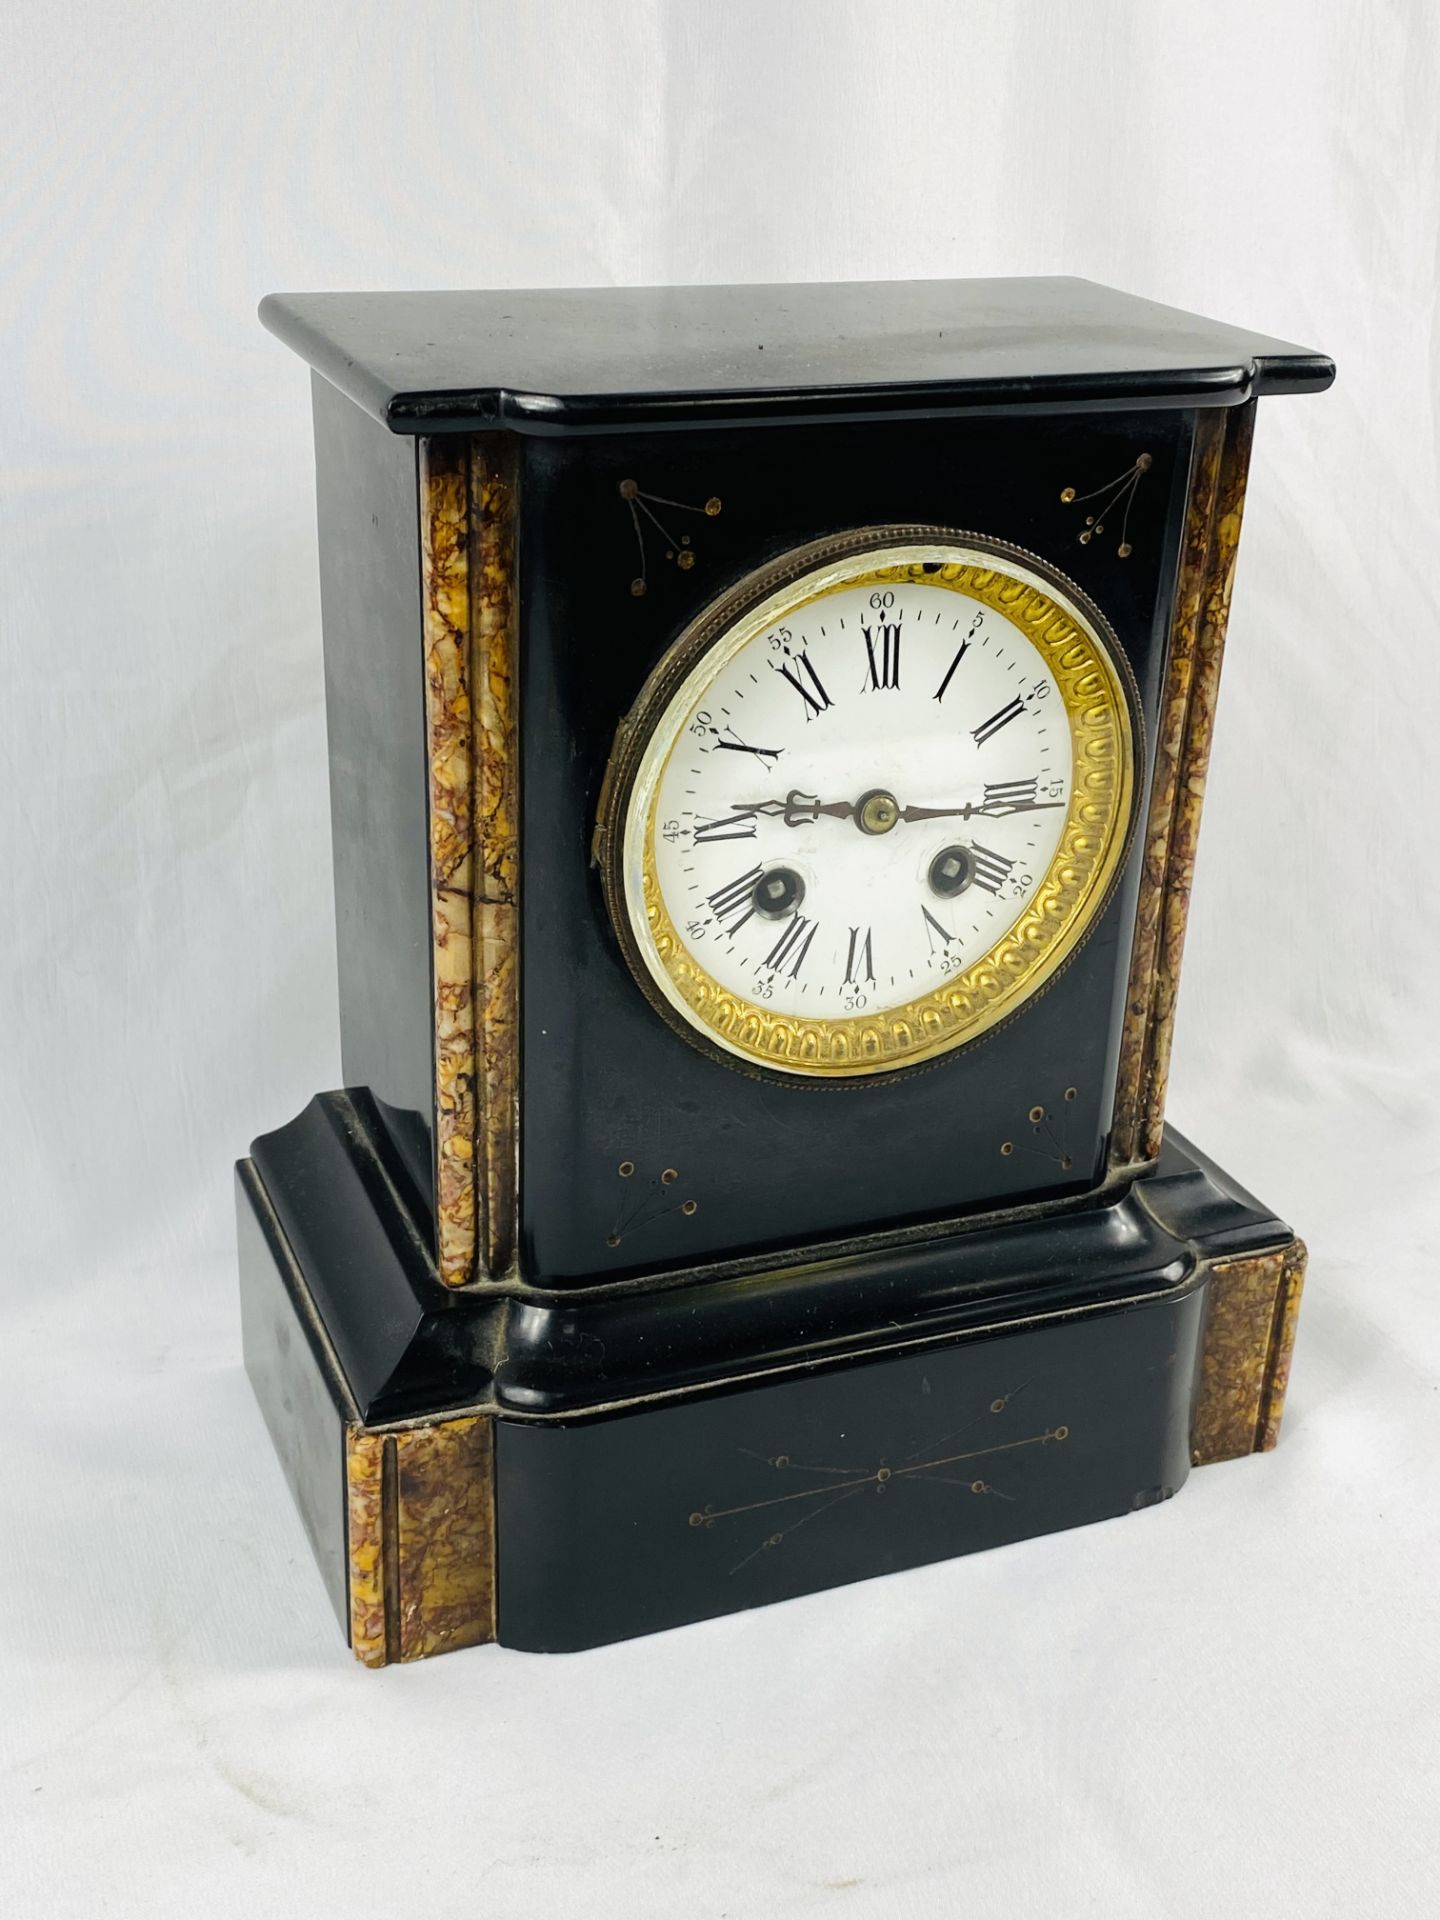 Slate and marble mantel clock - Image 3 of 4